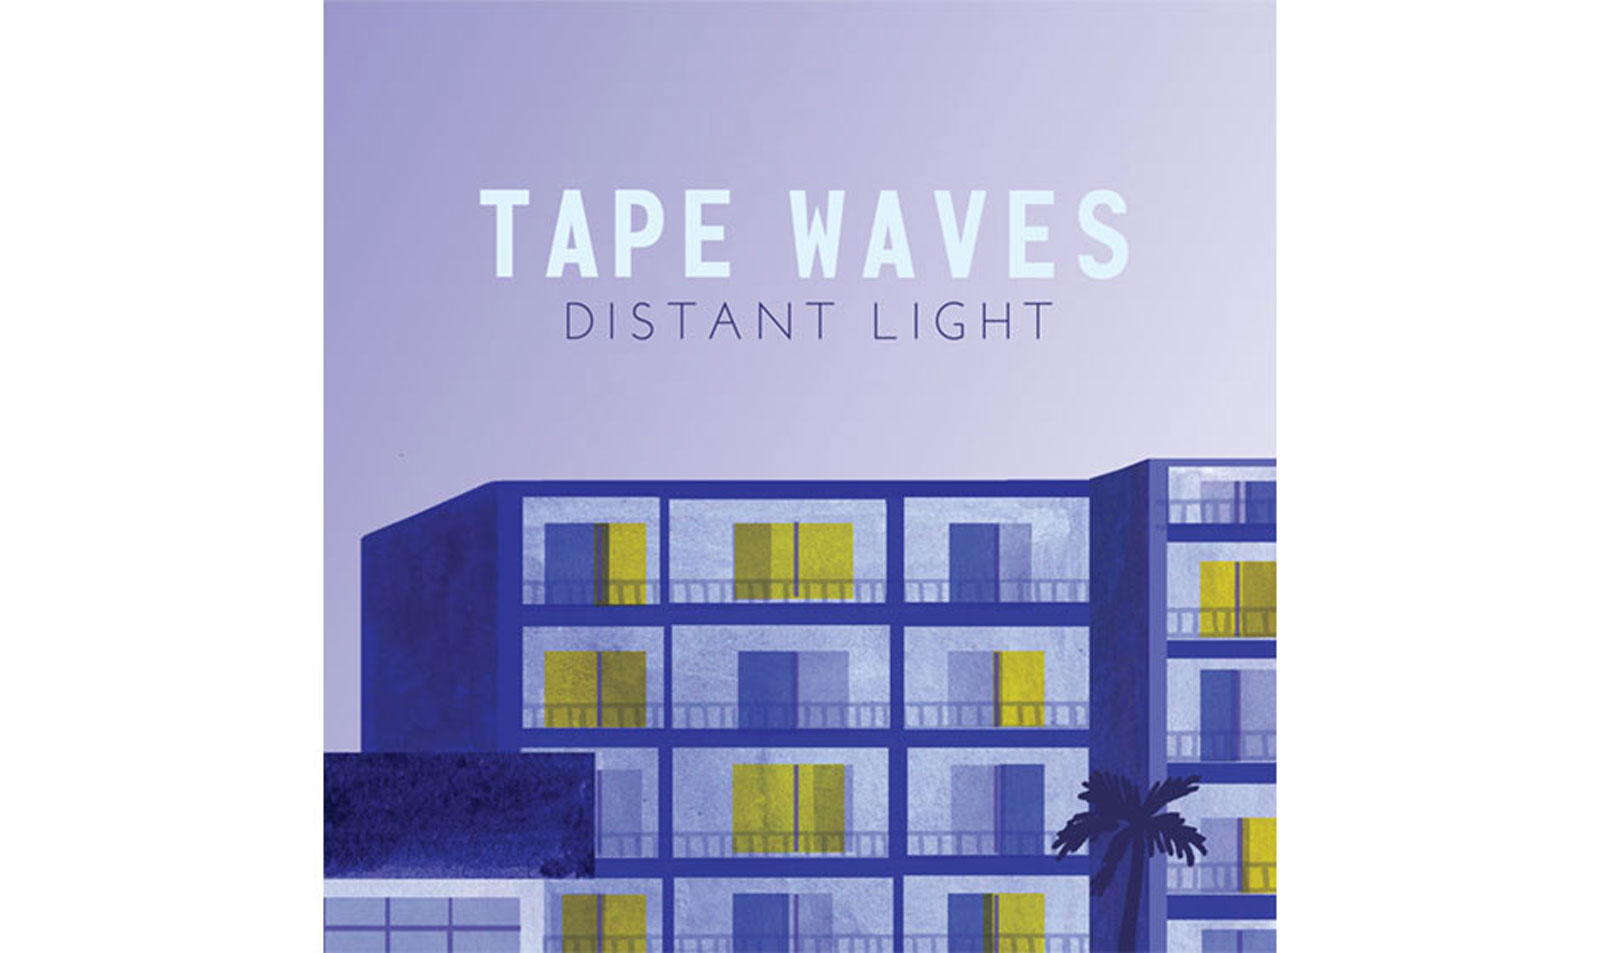 "Distant Light" by Tape Waves